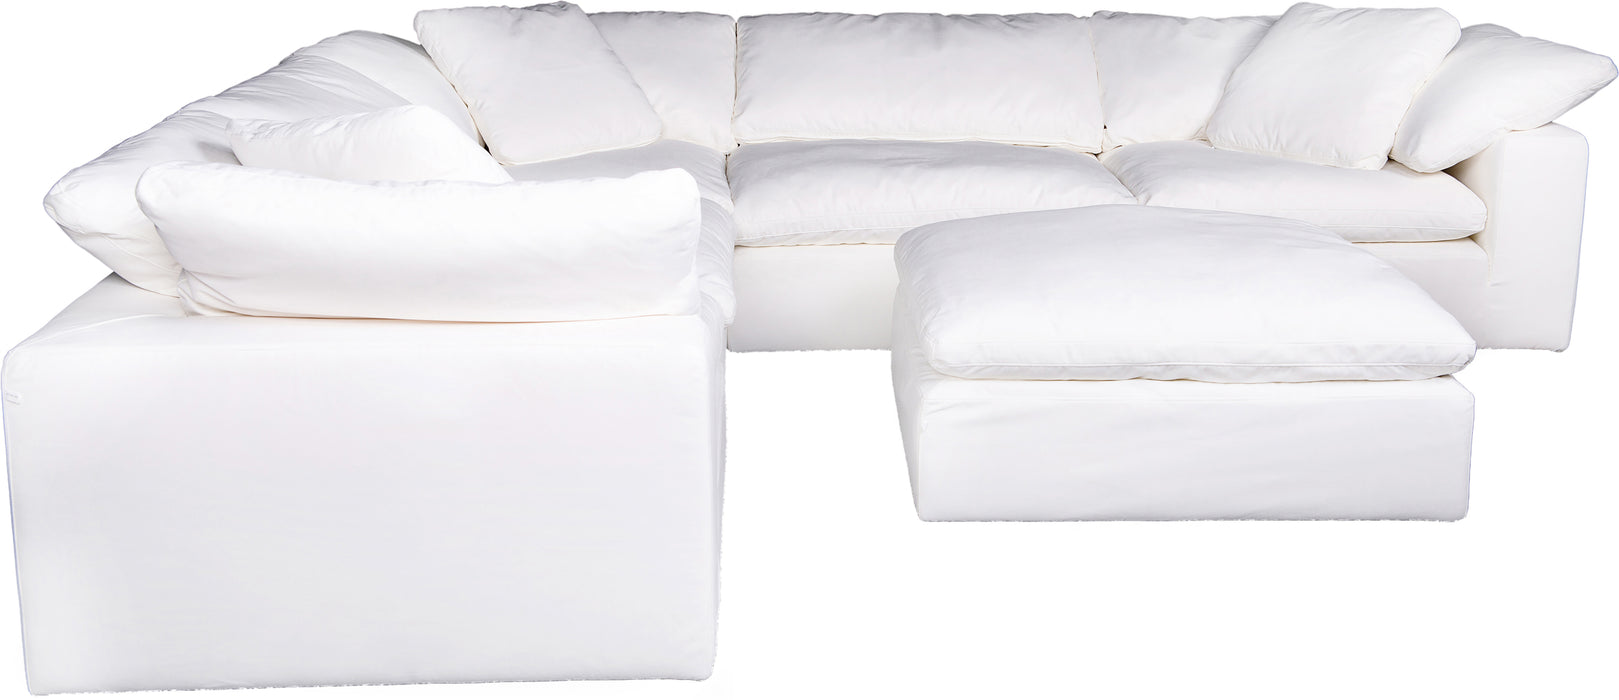 CLAY MODULAR SECTIONAL LIVESMART FABRIC WHITE